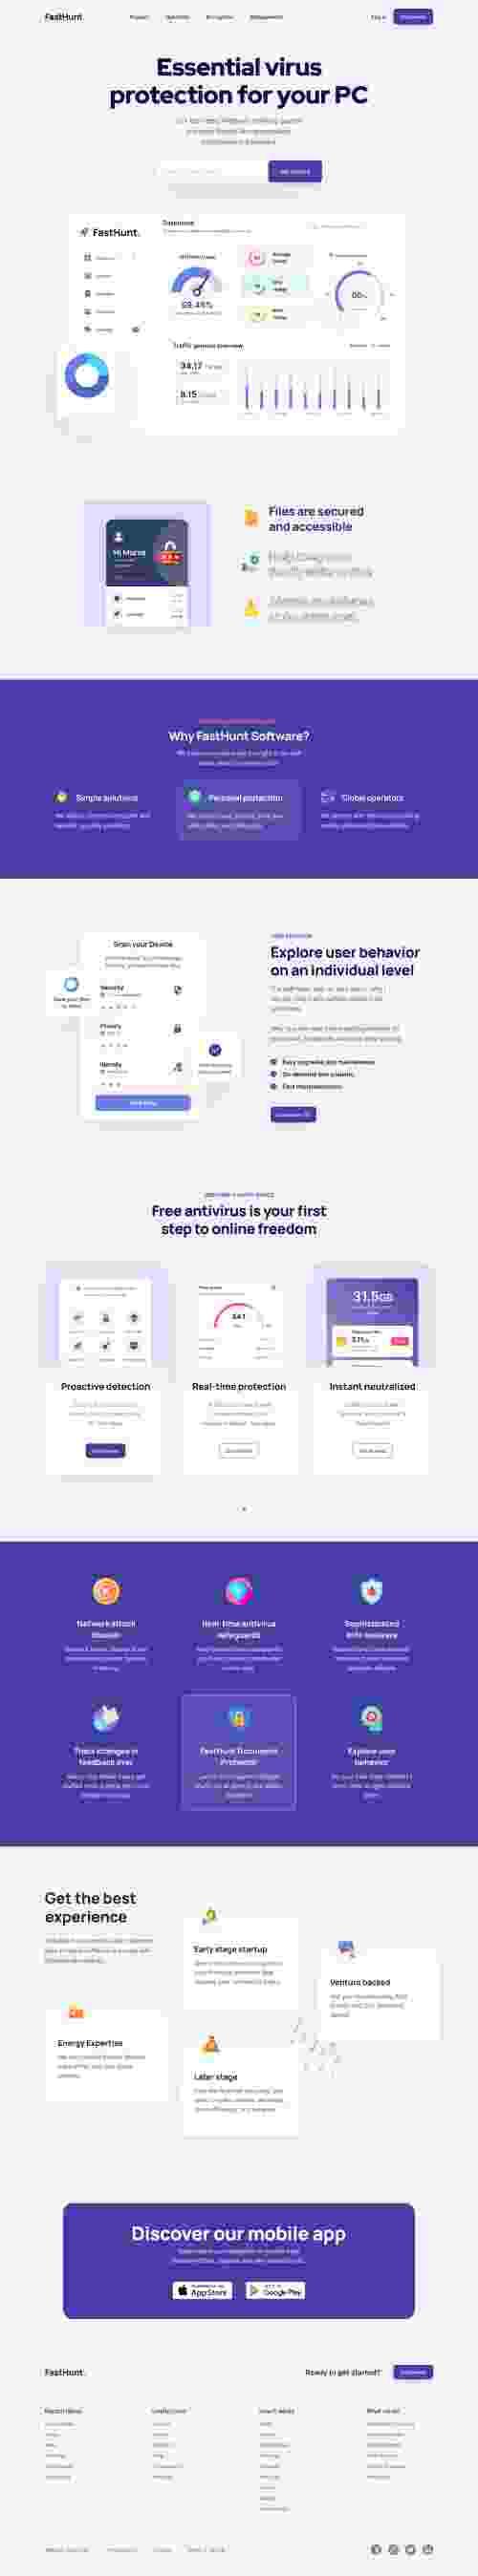 UIHut - FastHunt Security Software Landing Page - 12140